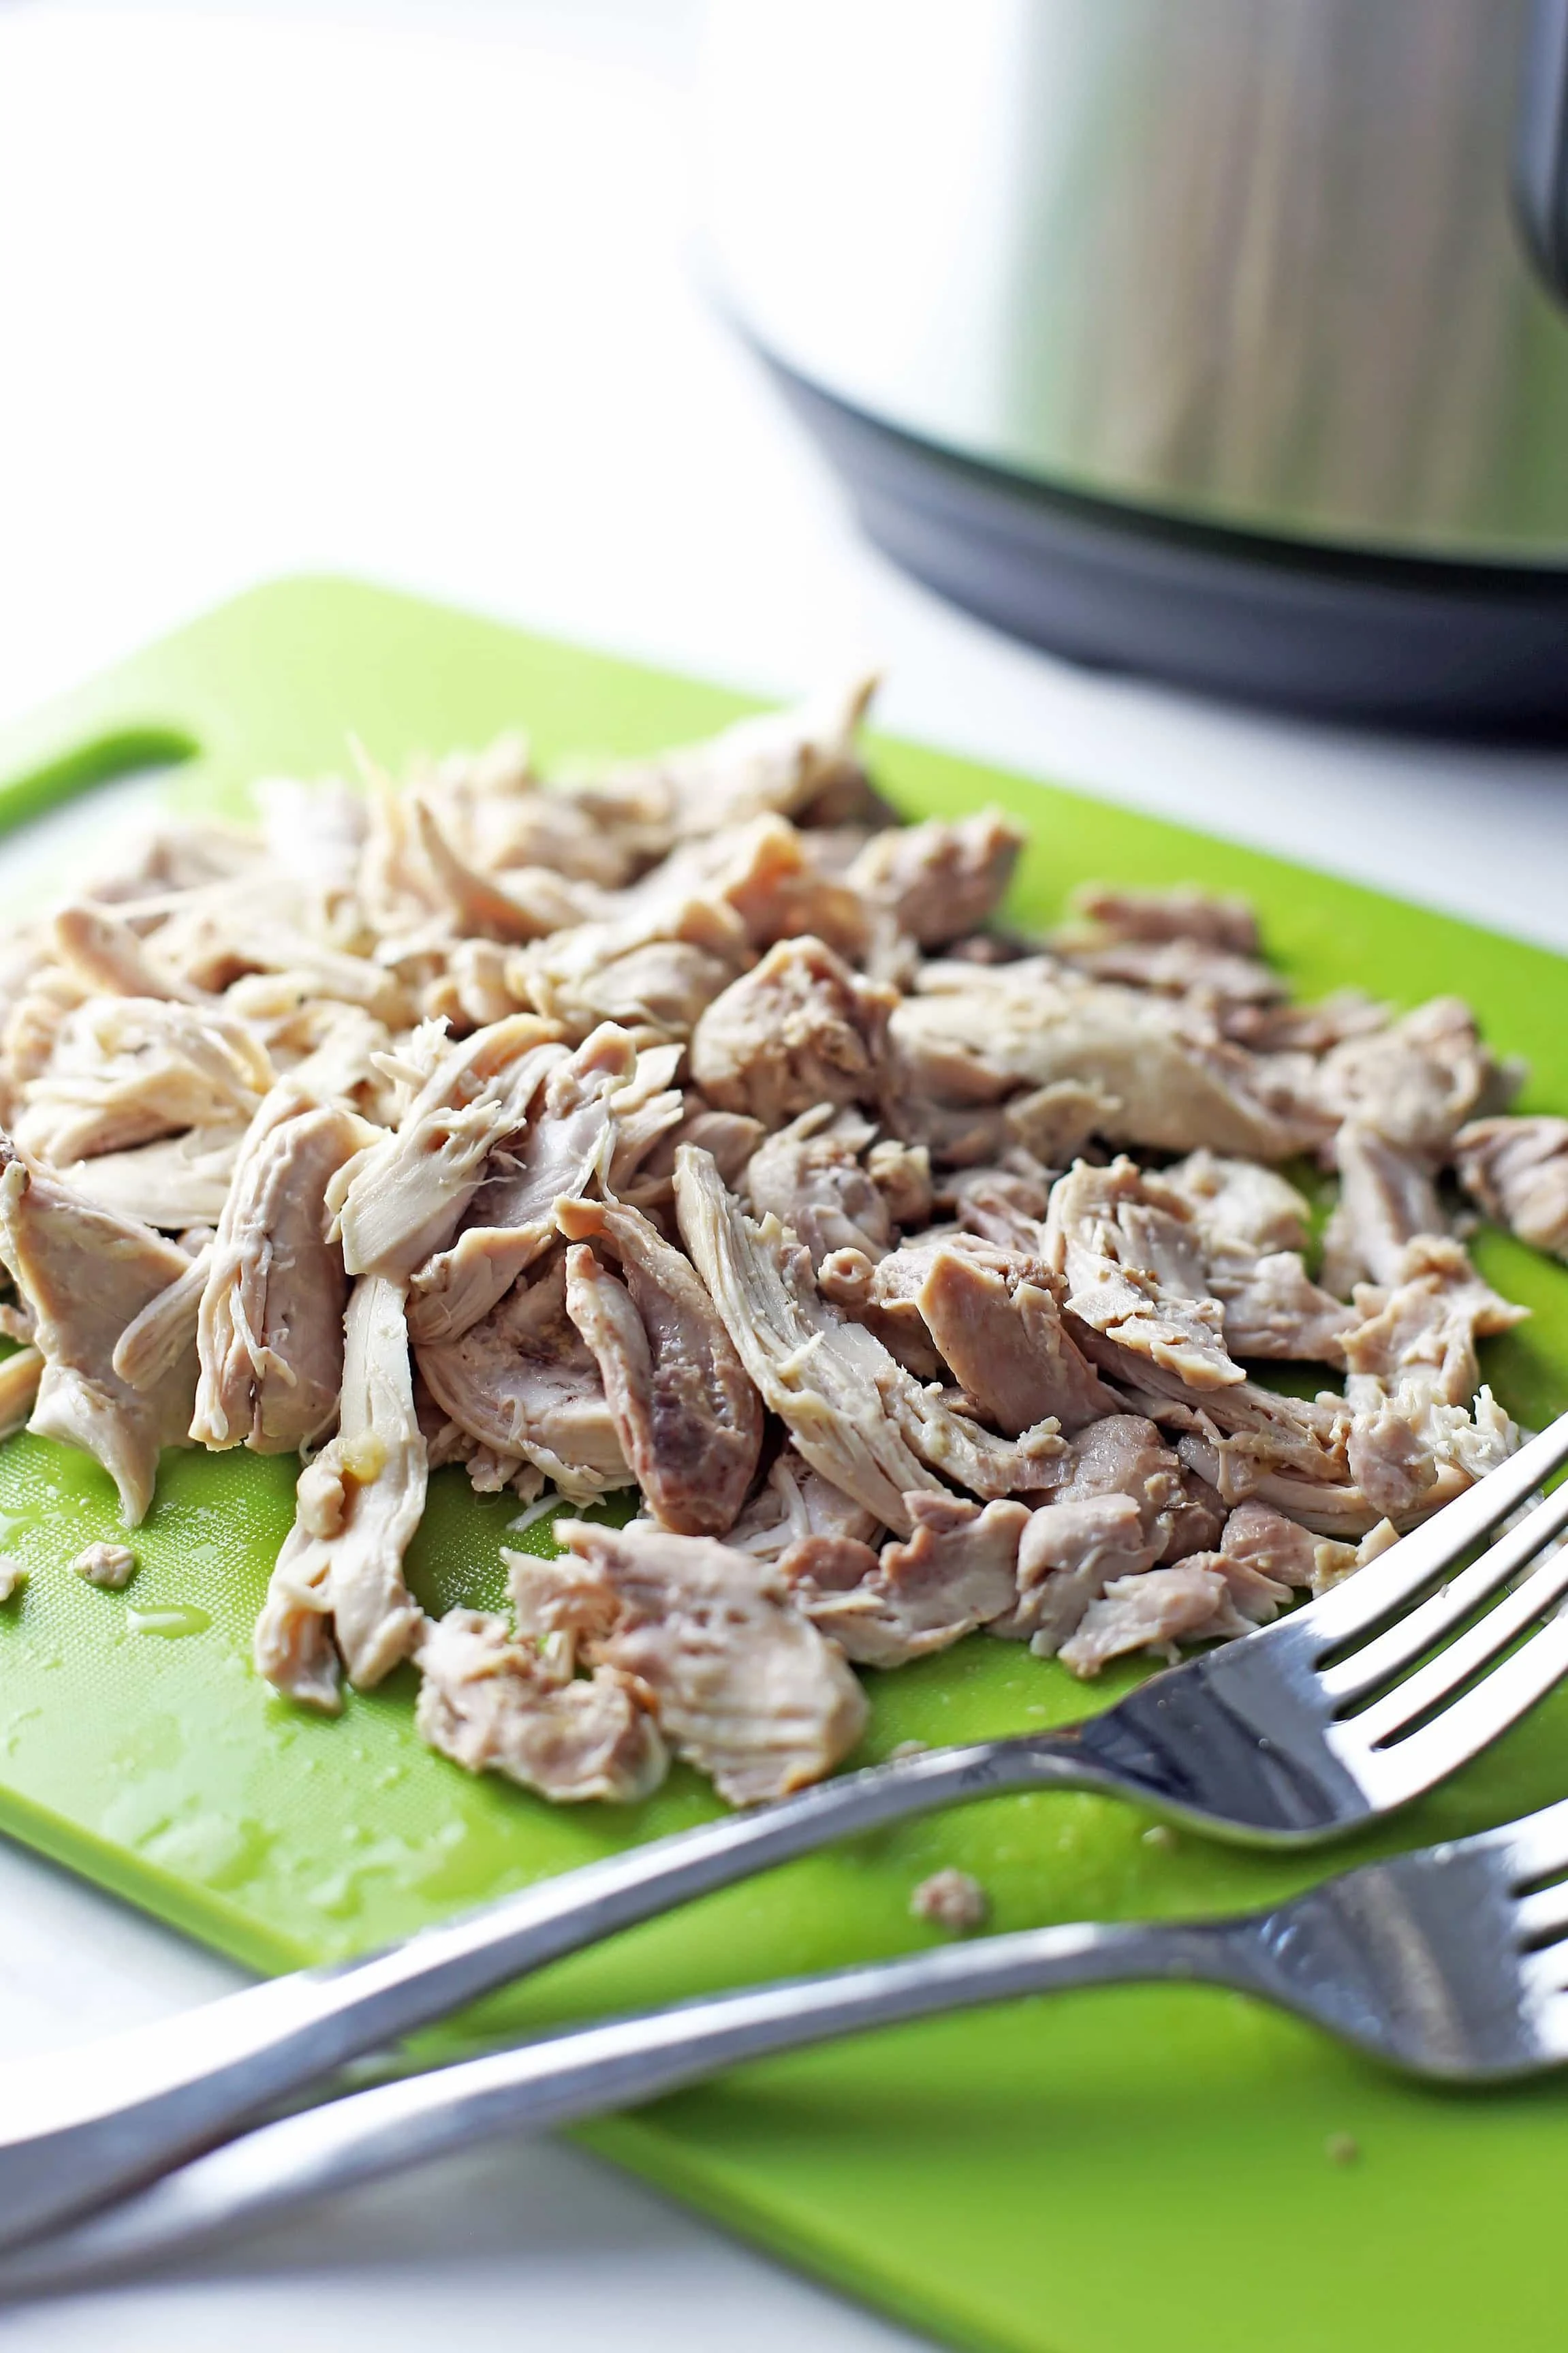 Shredded chicken thighs with two forks on top of green plastic cutting board.